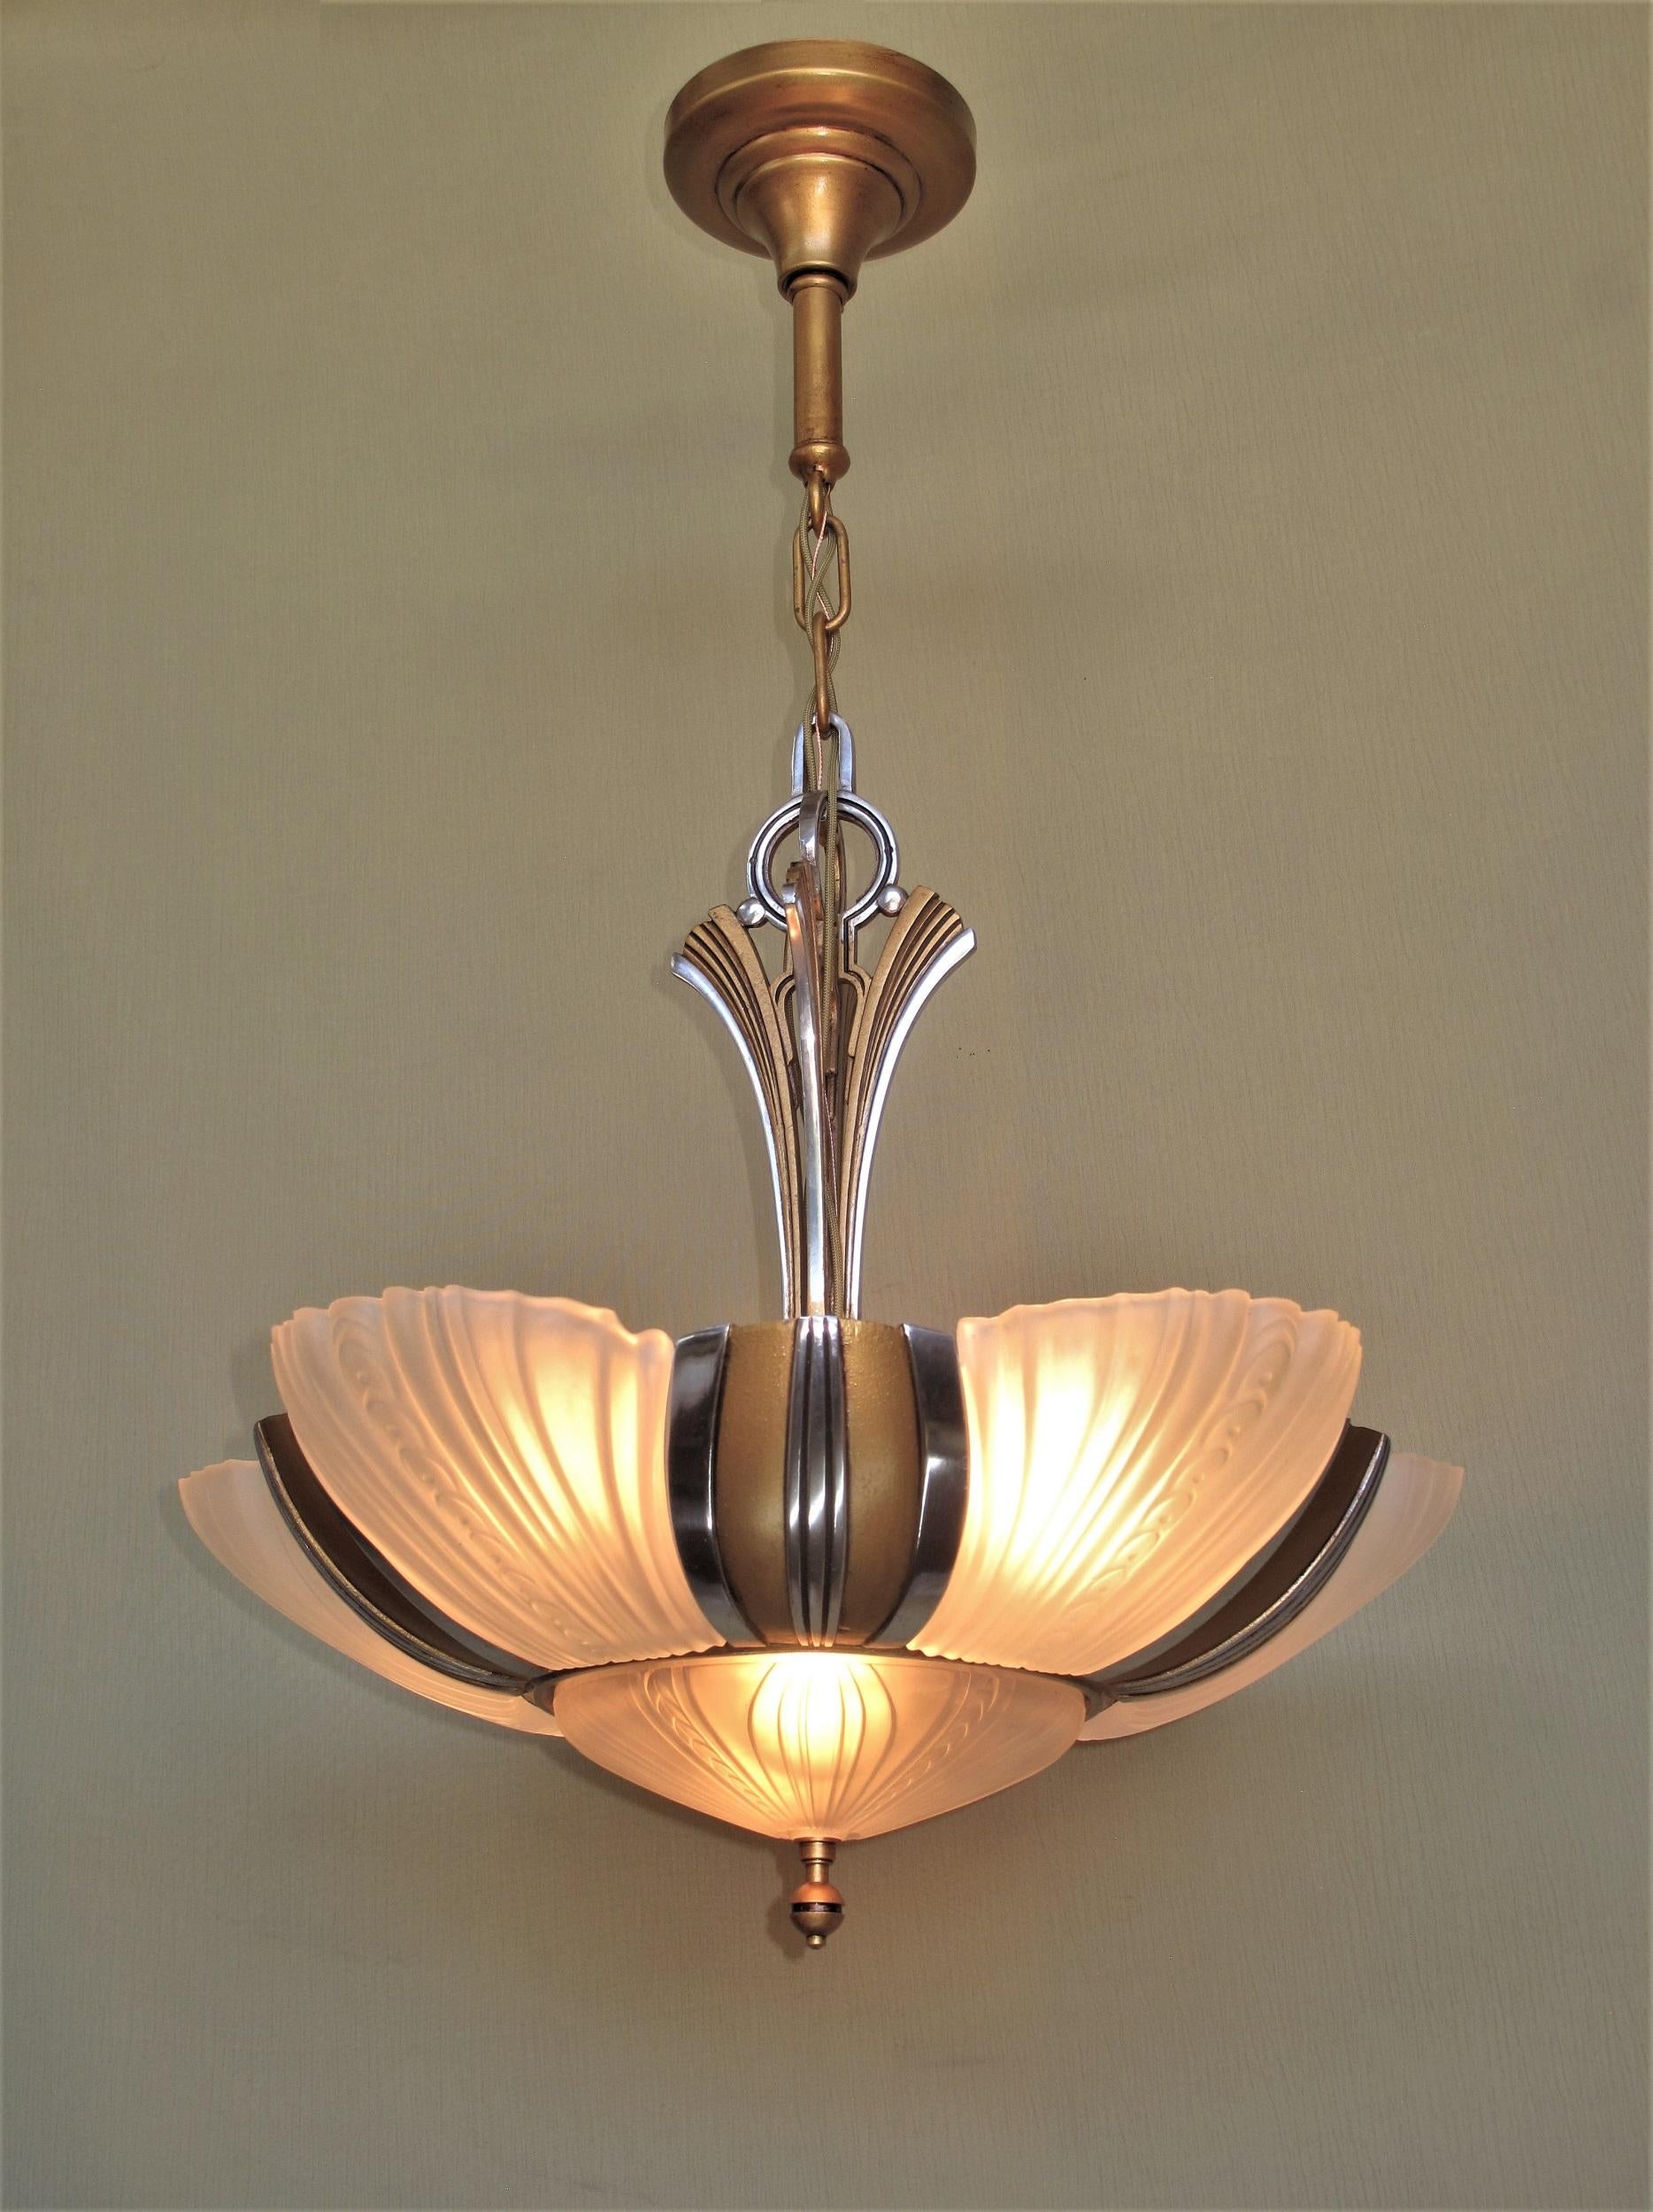 Two matching 7 light bulb 1930s Art Deco ceiling fixtures, priced each.
Restored to original colors including highly polished aluminum accents (NOT painted) and a warm antique golden body color. There two sockets lighting the bottom shade along with